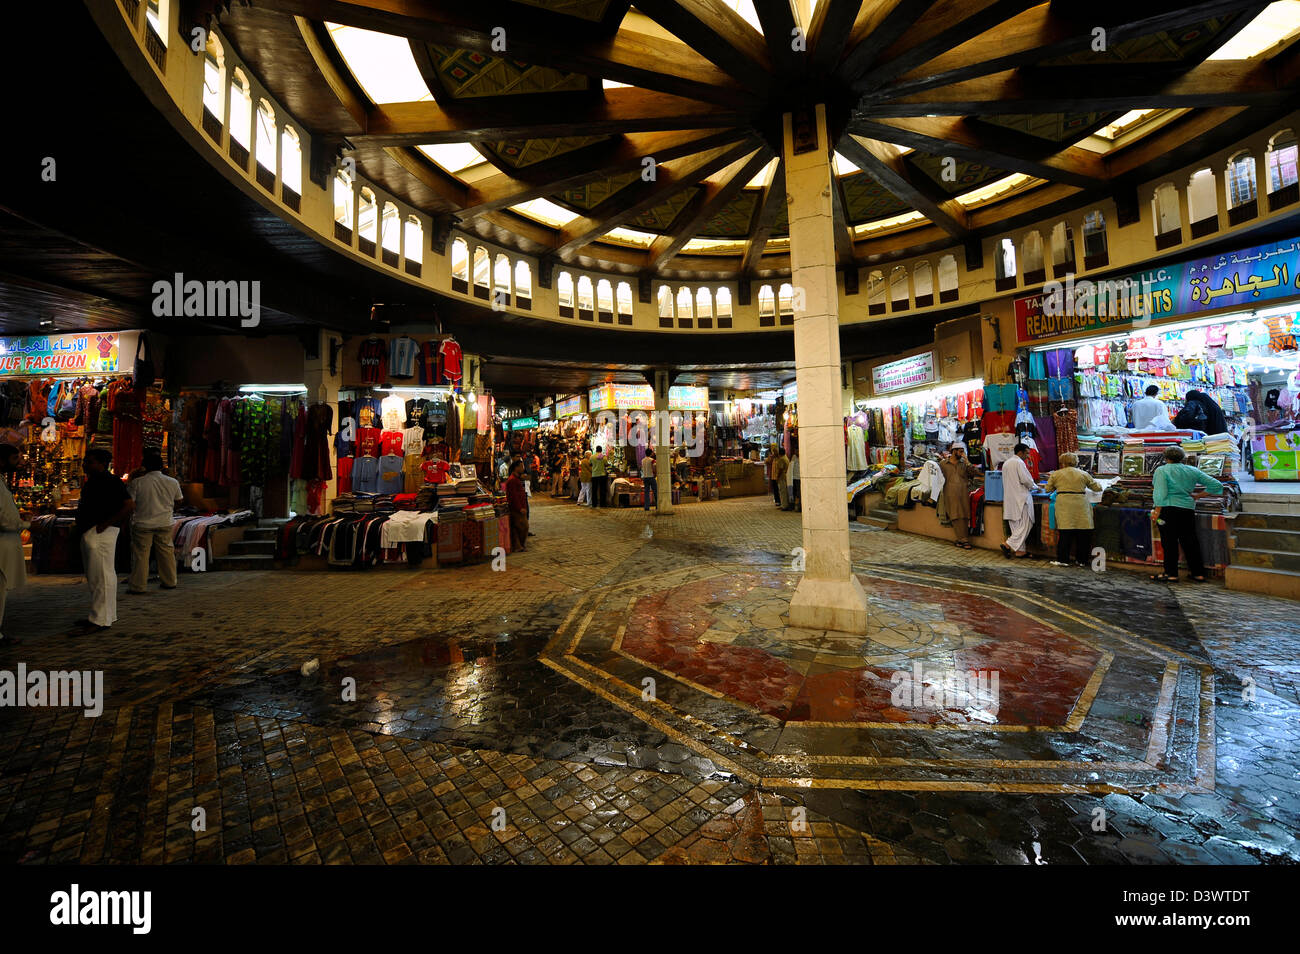 Muttrah Souq in the Muscat, Oman, oldest marketplace in the region Stock Photo